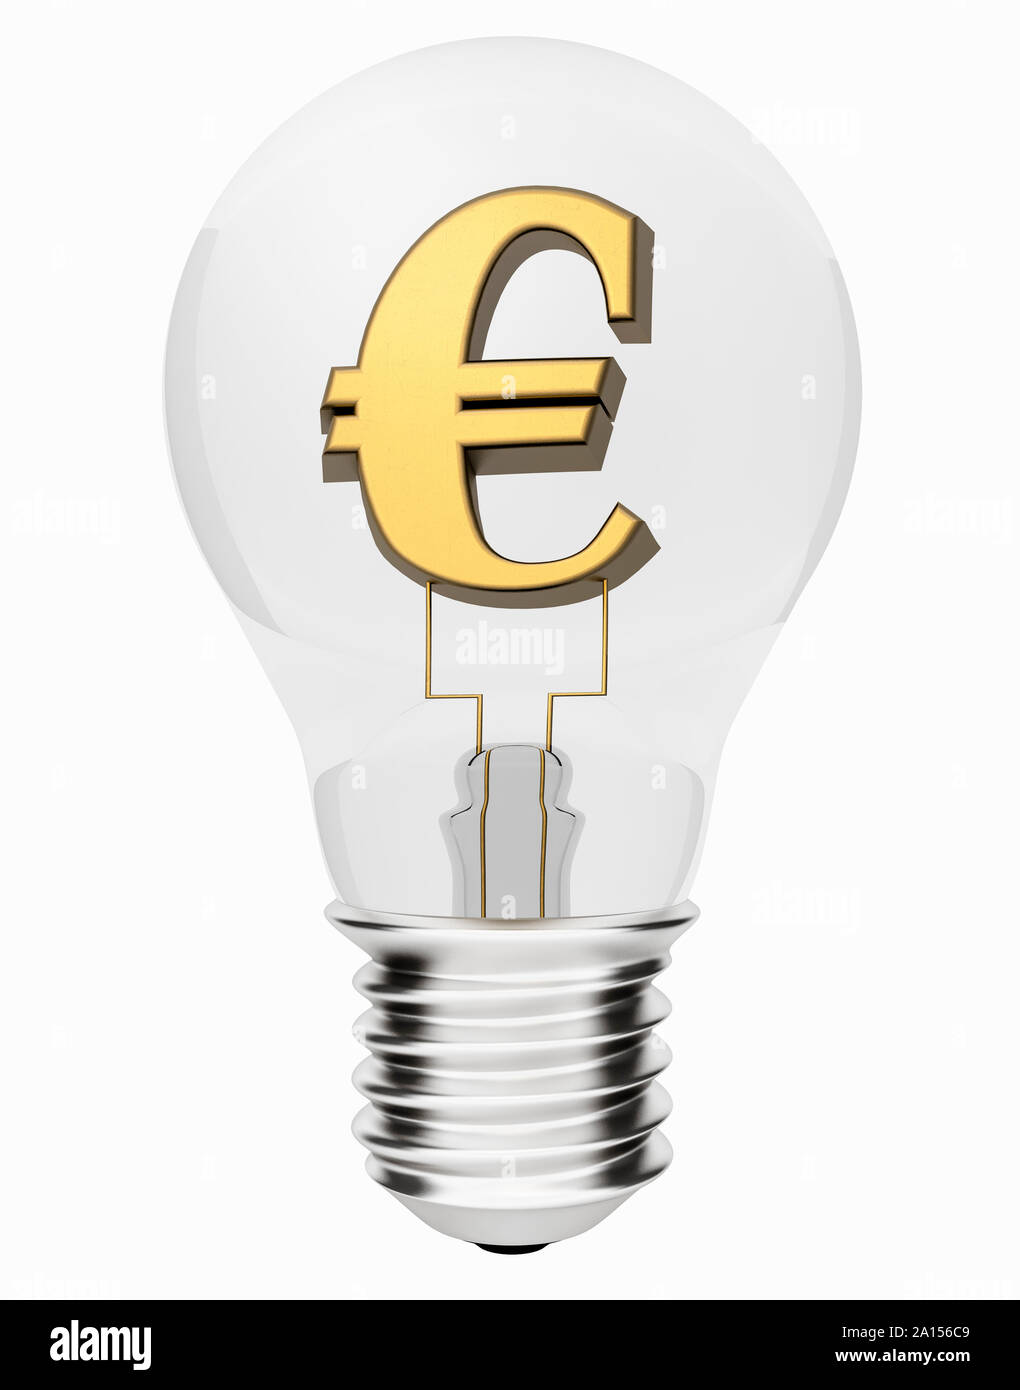 Lightbulb with Euro currency symbol inside – cost of energy concept Stock Photo